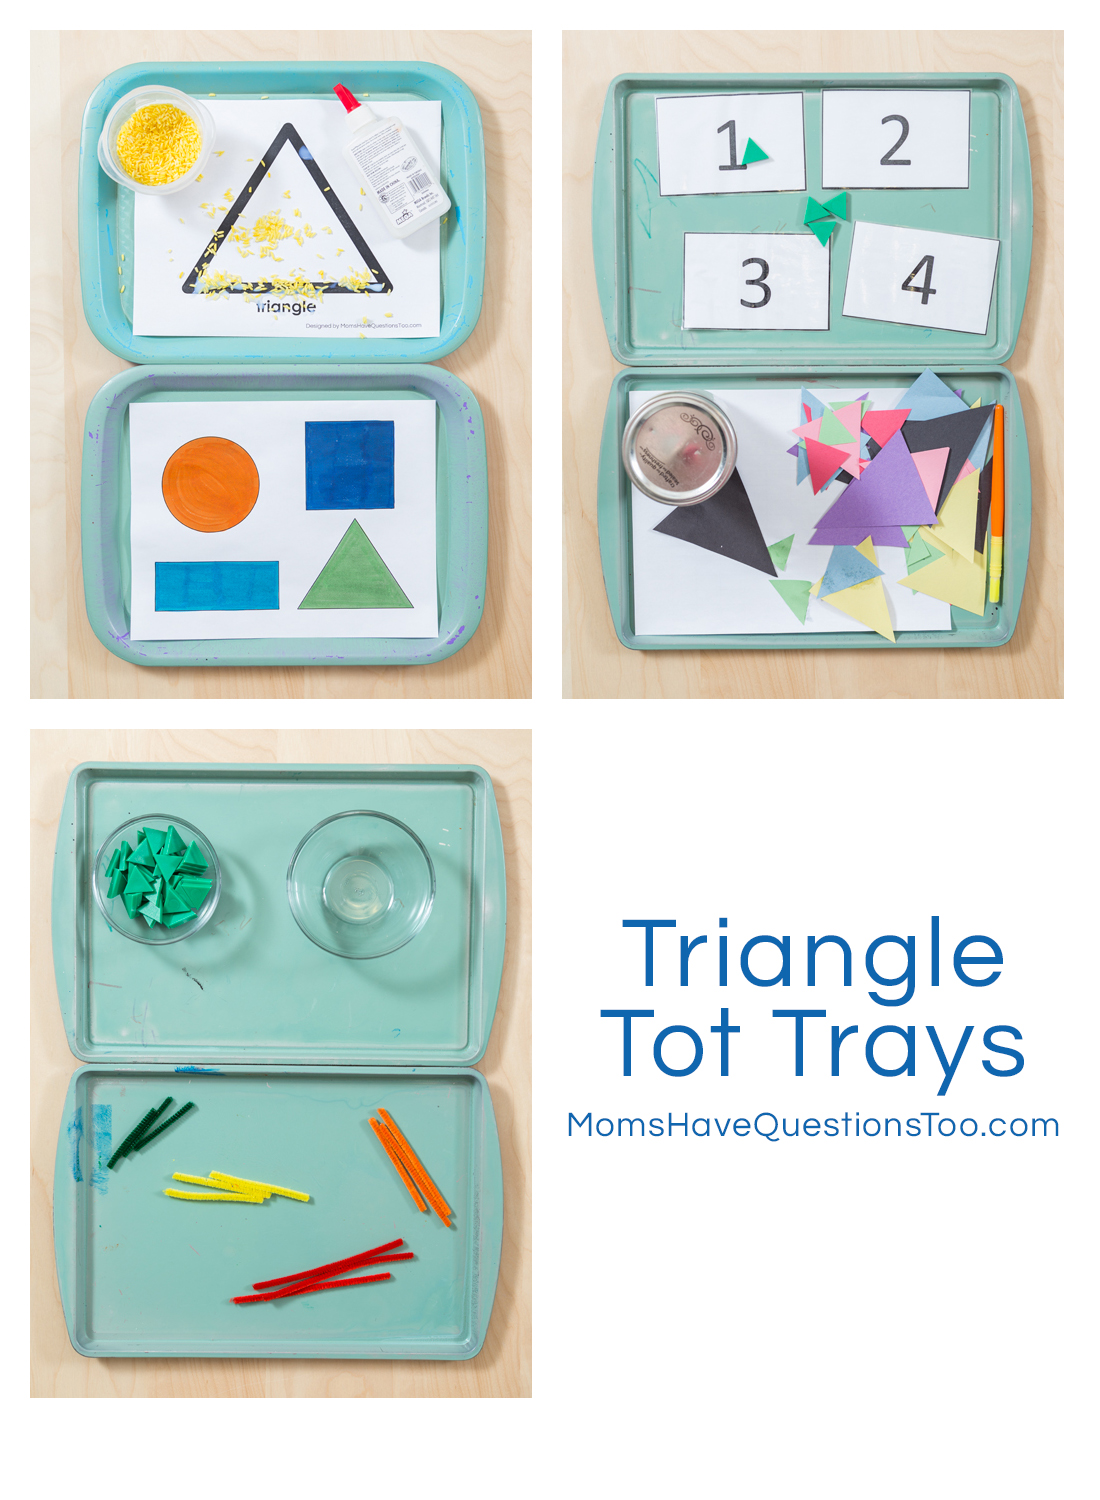 Triangle Tot Trays - Moms Have Questions Too